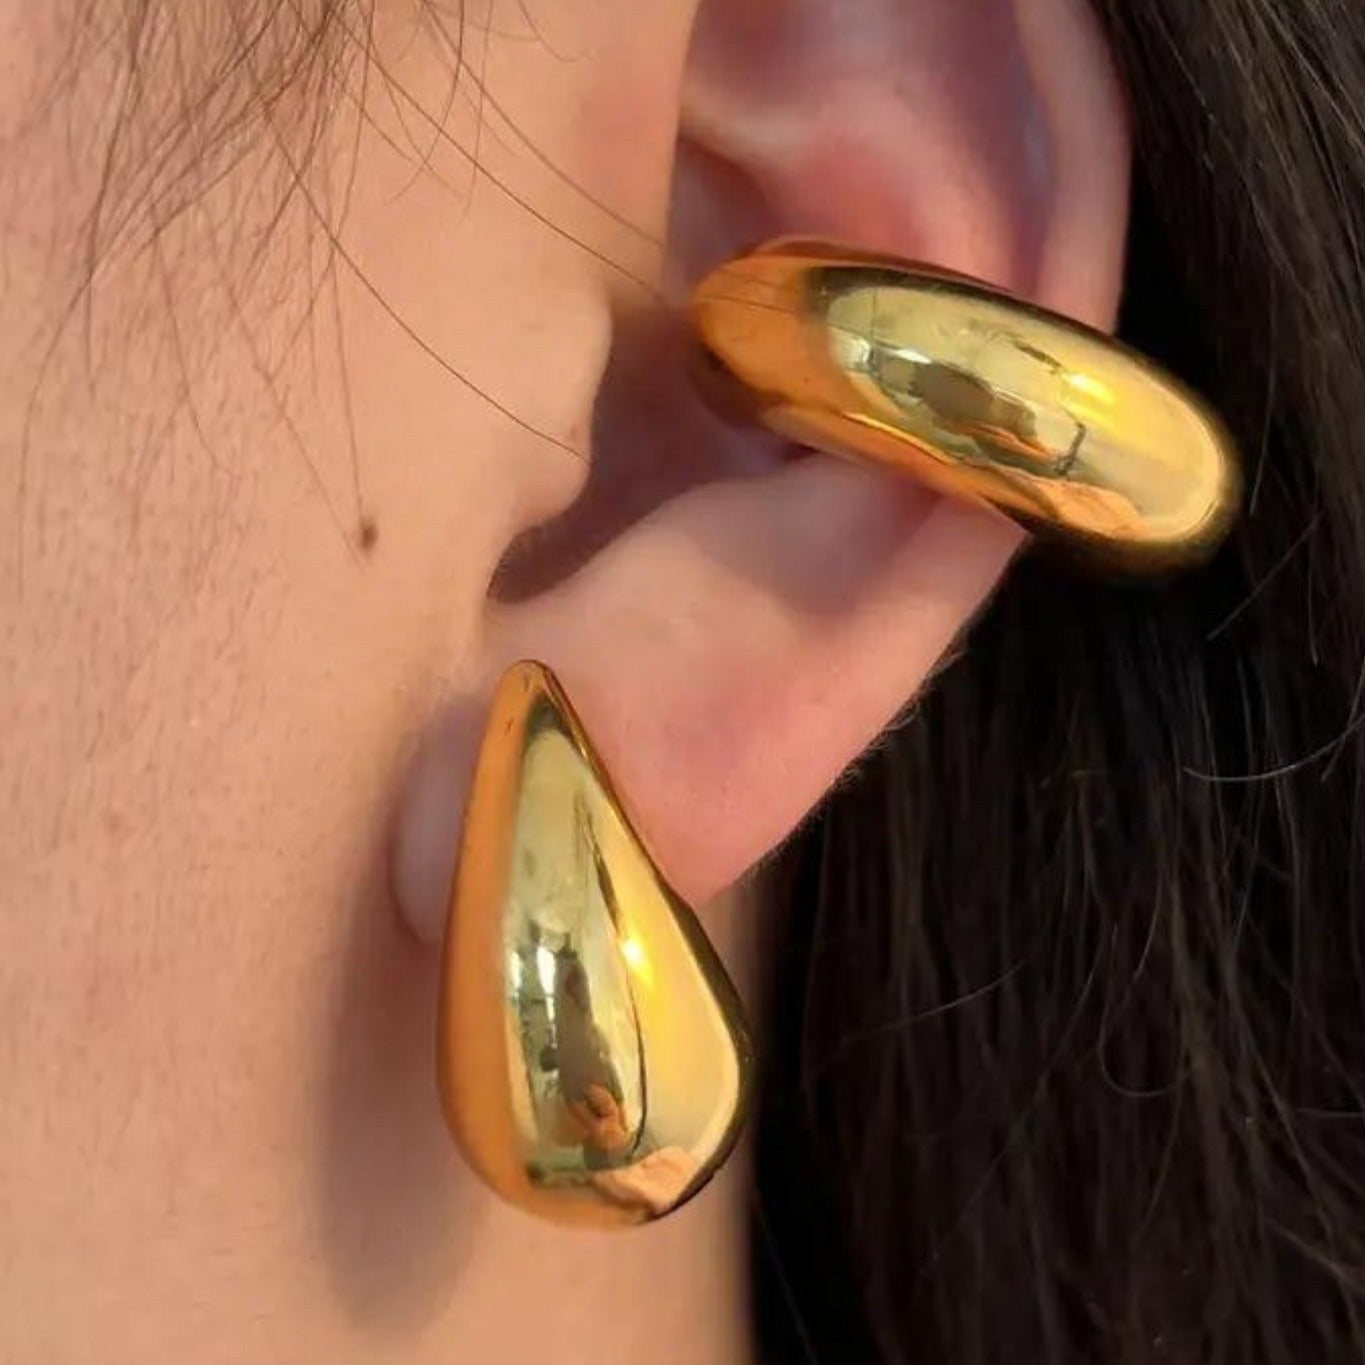 Chunky silver and gold earrings